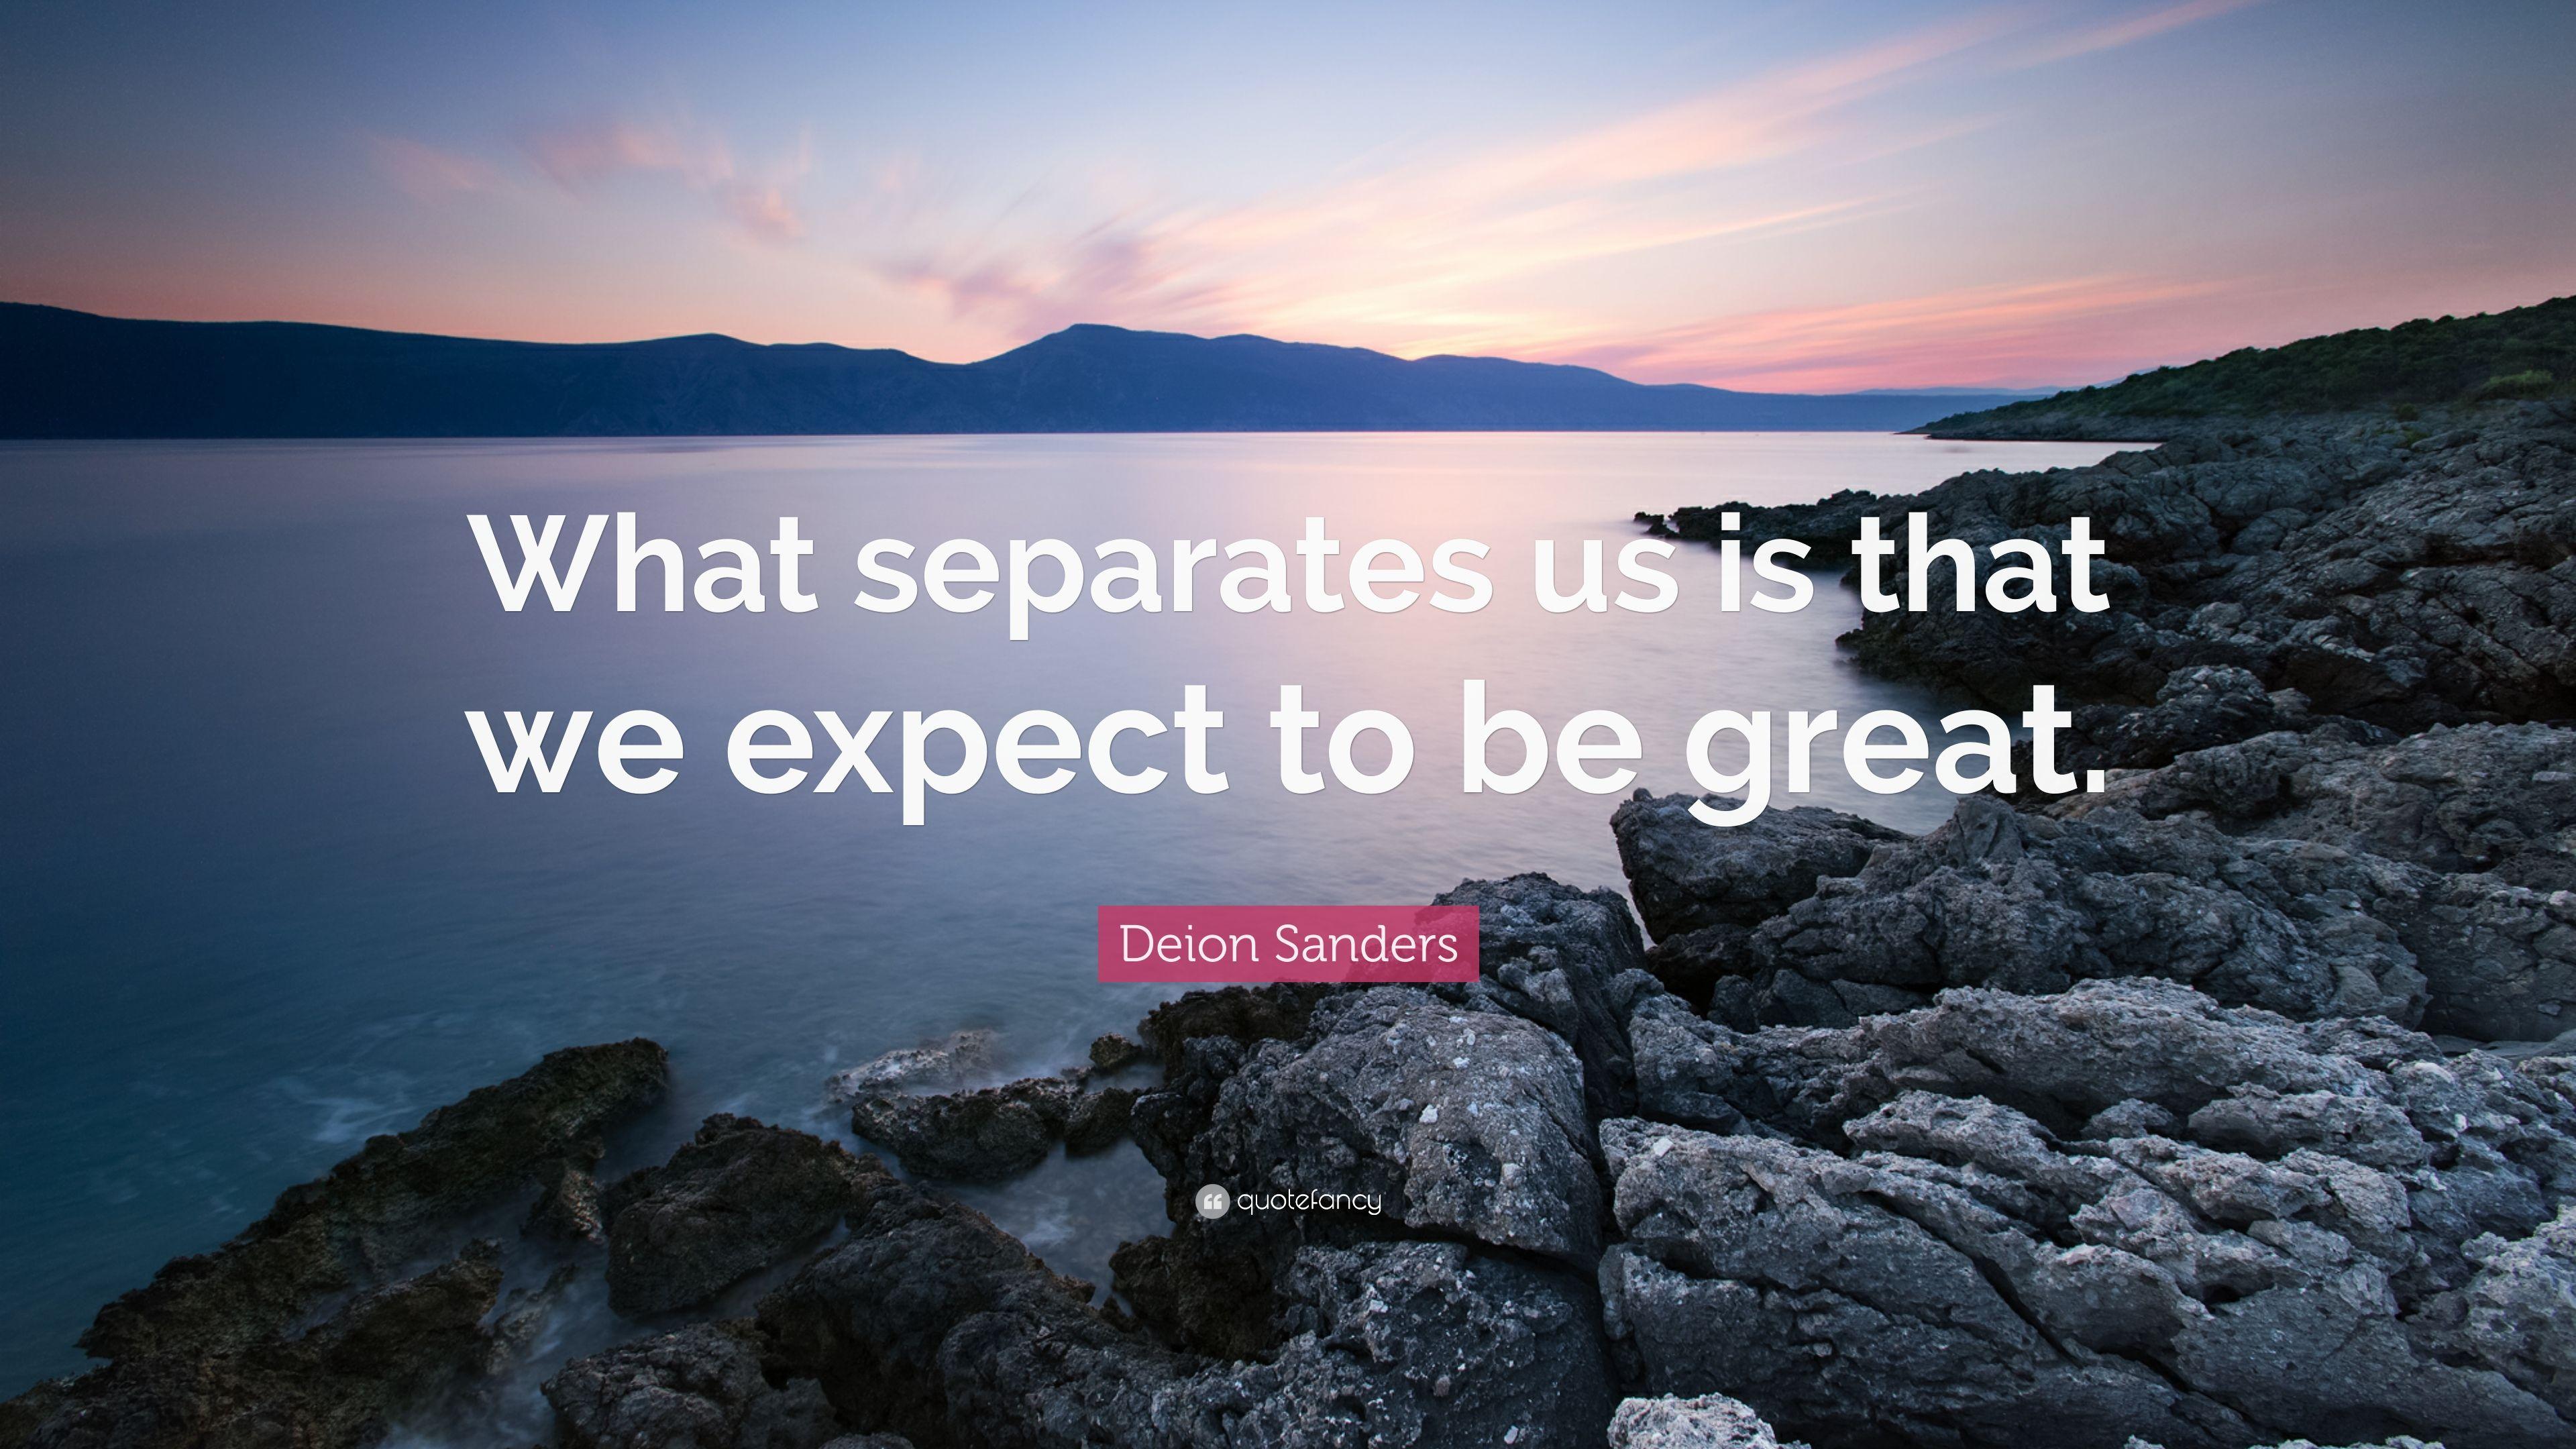 Deion Sanders Quote: “What separates us is that we expect to be